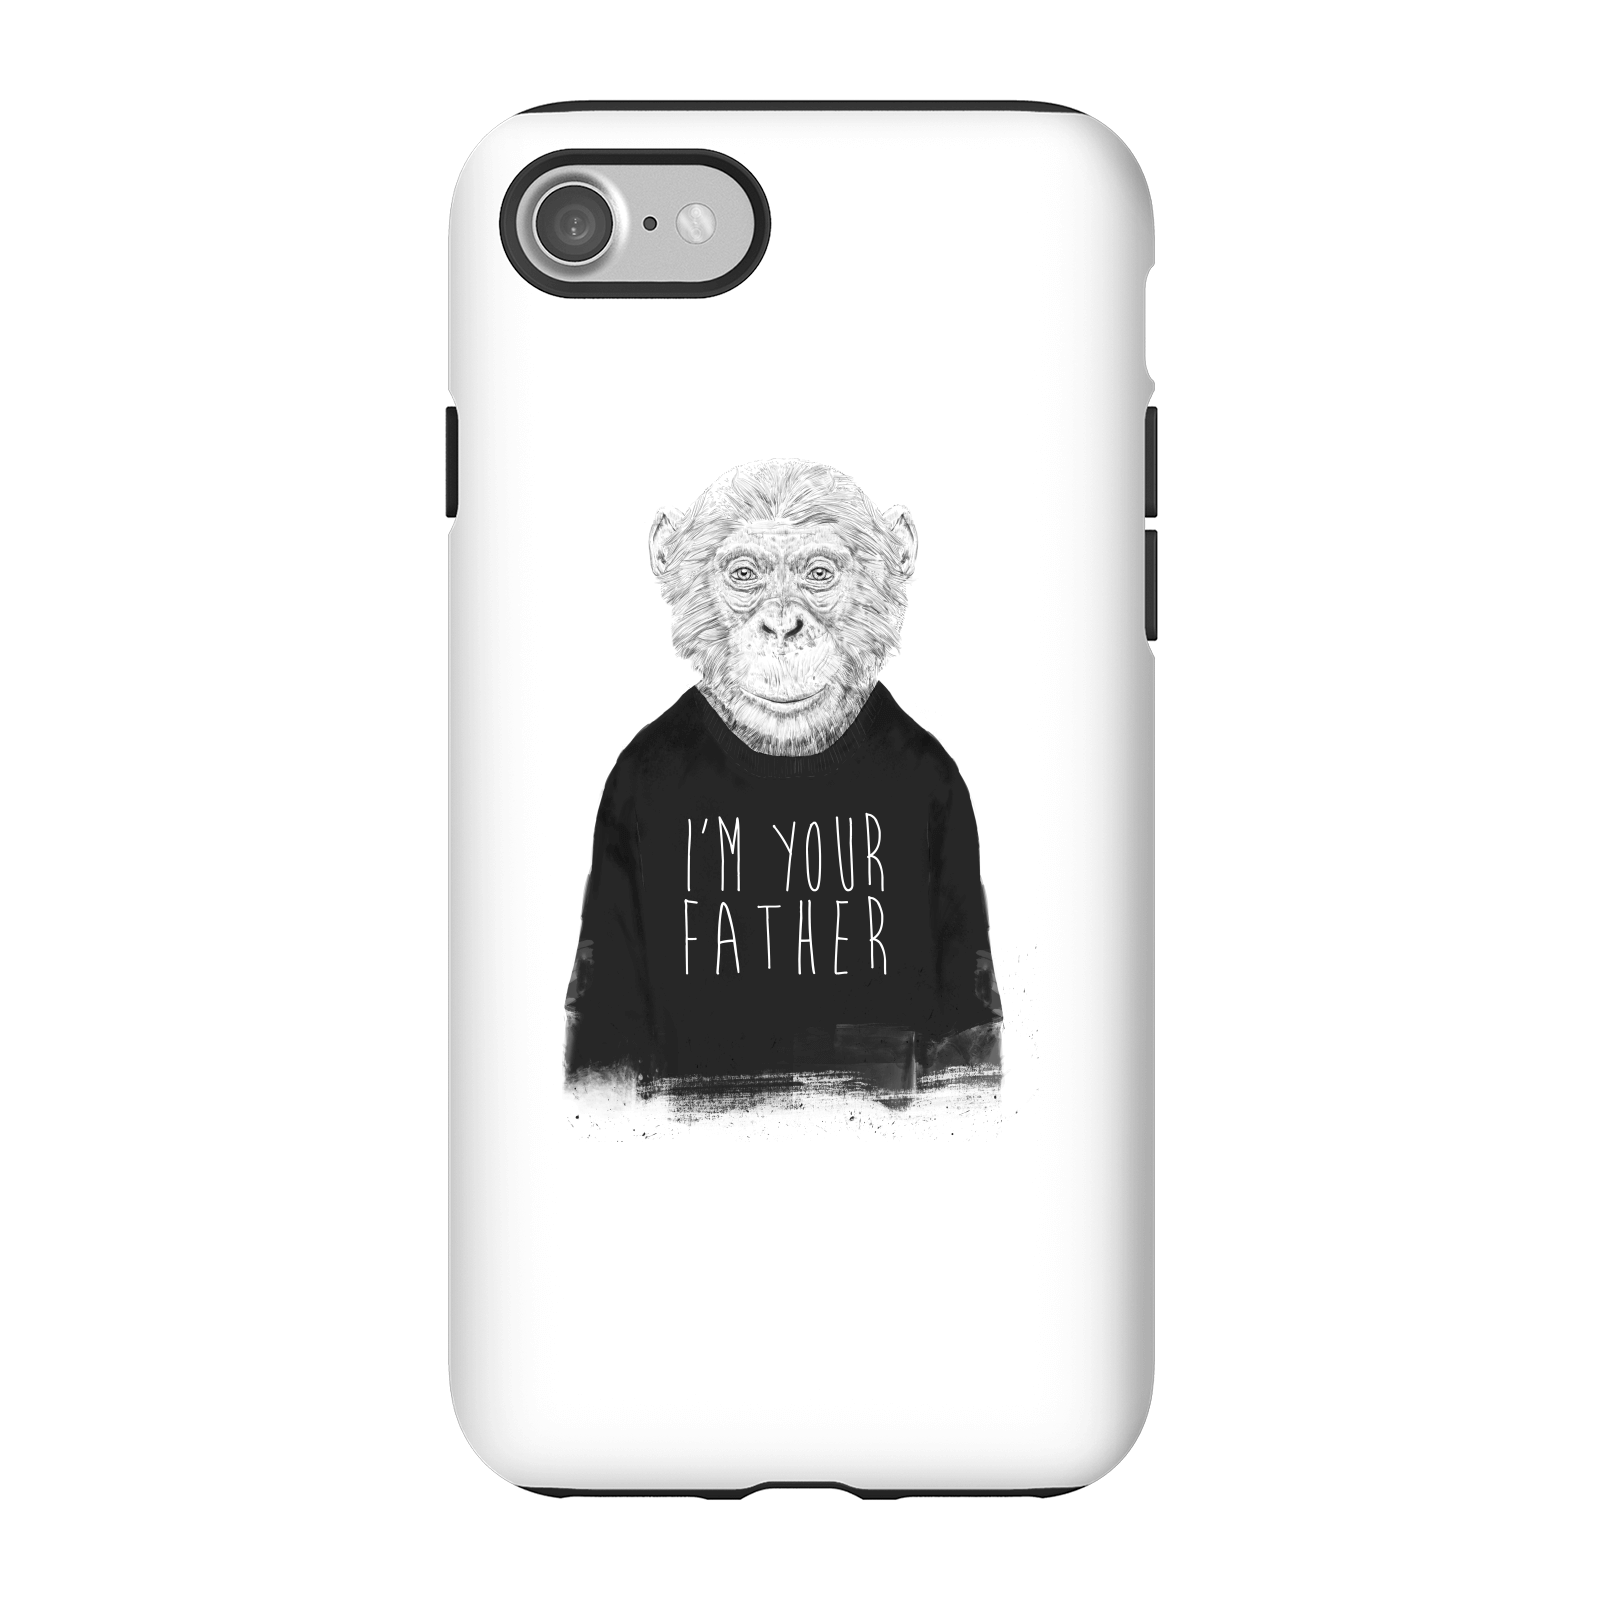 Balazs Solti I'm Your Father Phone Case for iPhone and Android - iPhone 7 - Tough Case - Gloss